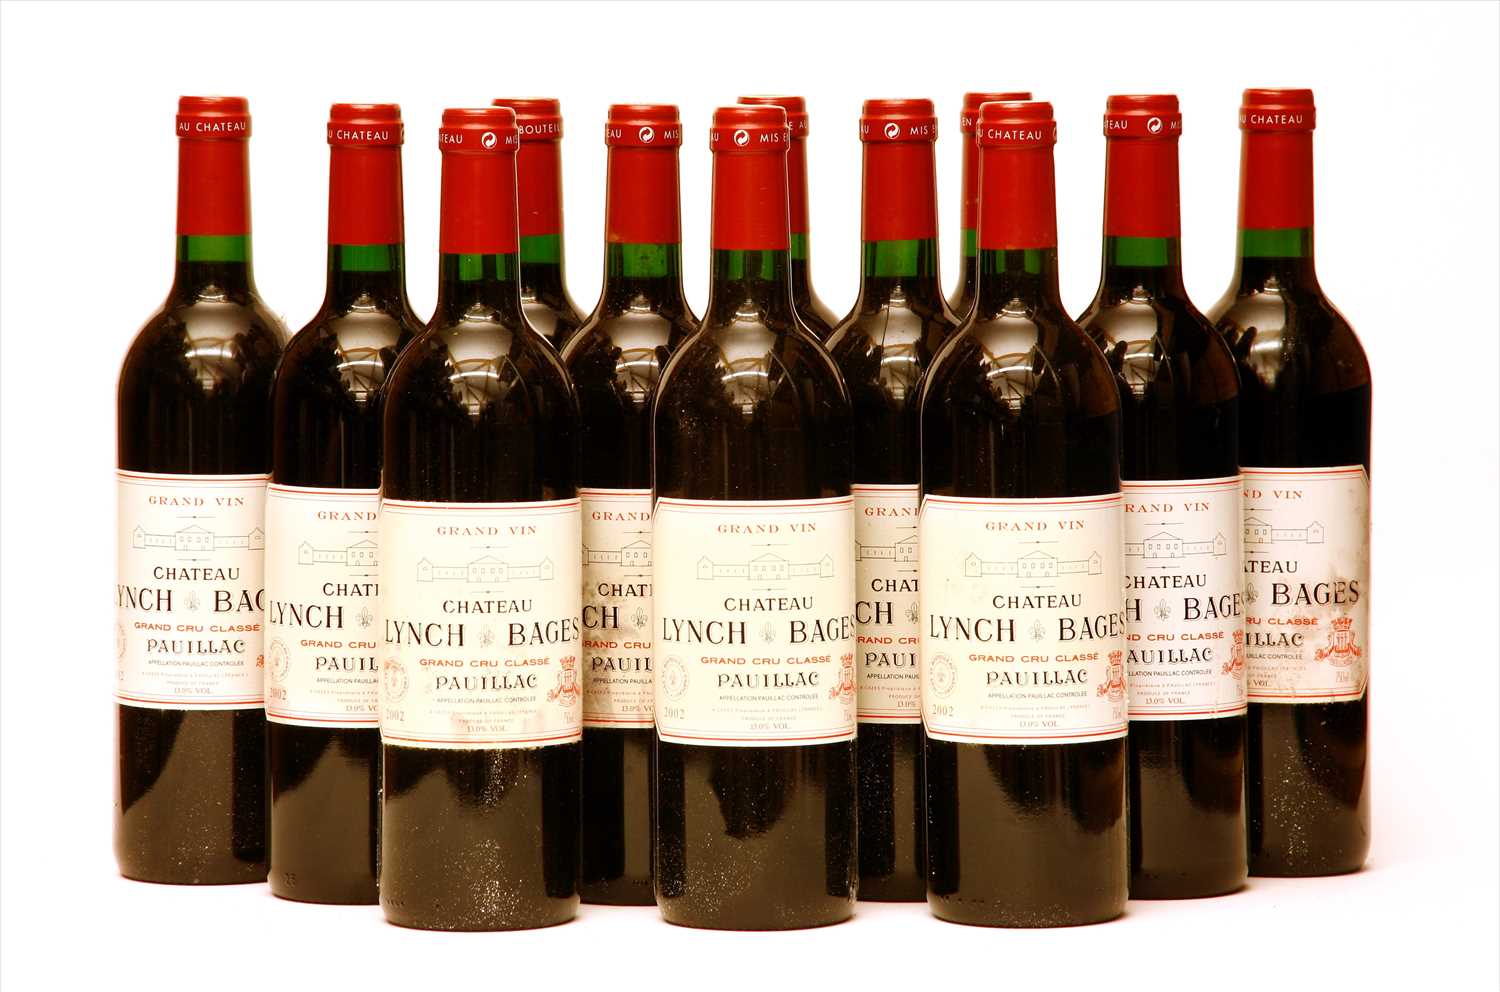 Lot 335 - Chateau Lynch Bages, Pauillac, 2nd growth, 2002, twelve bottles